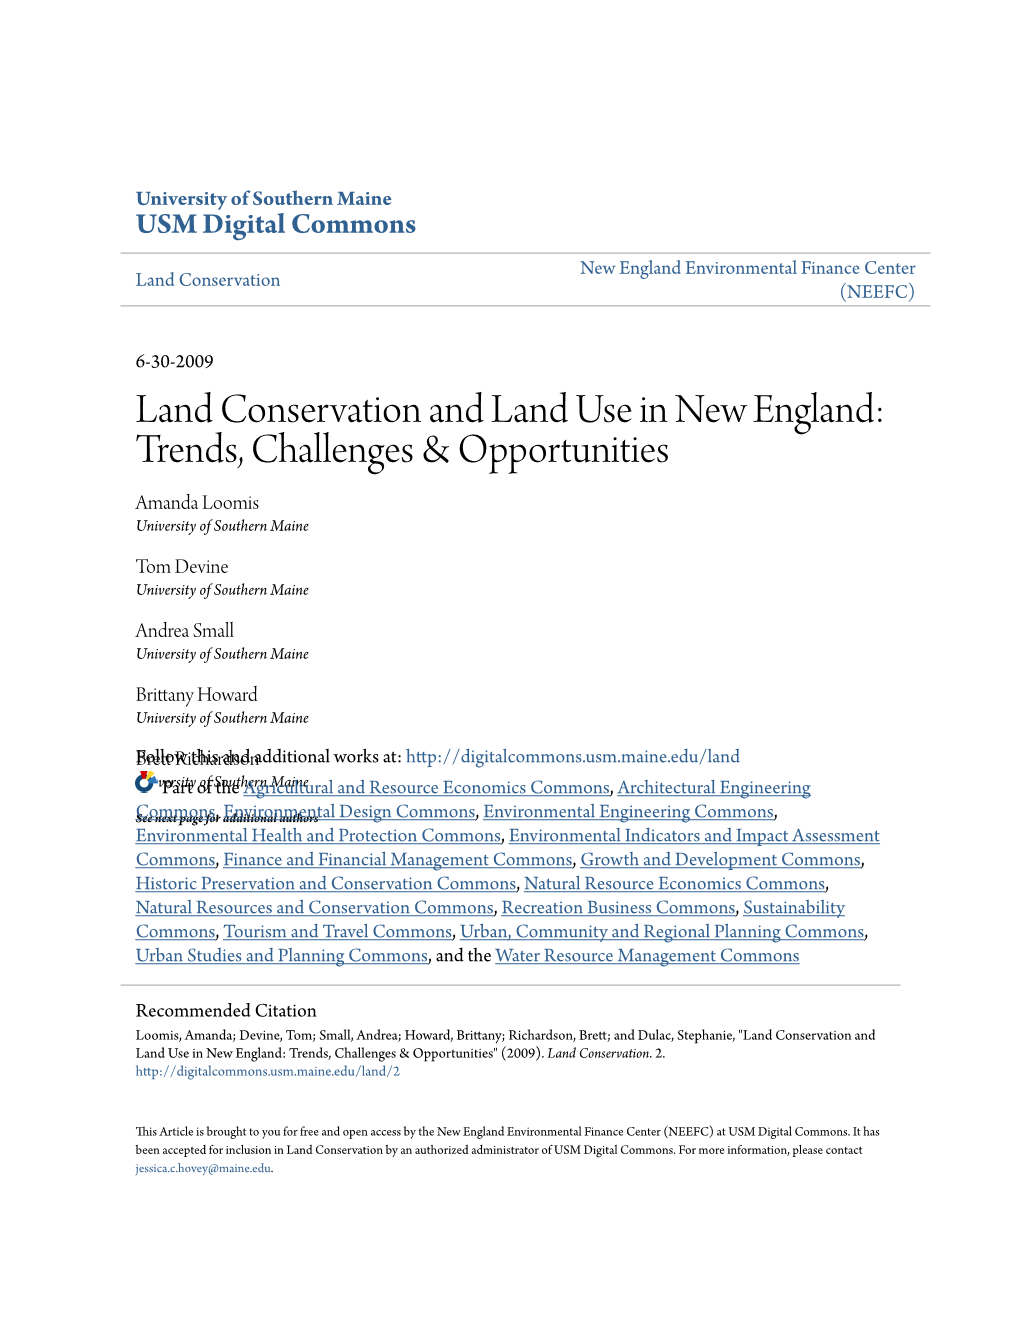 Land Conservation and Land Use in New England: Trends, Challenges & Opportunities Amanda Loomis University of Southern Maine